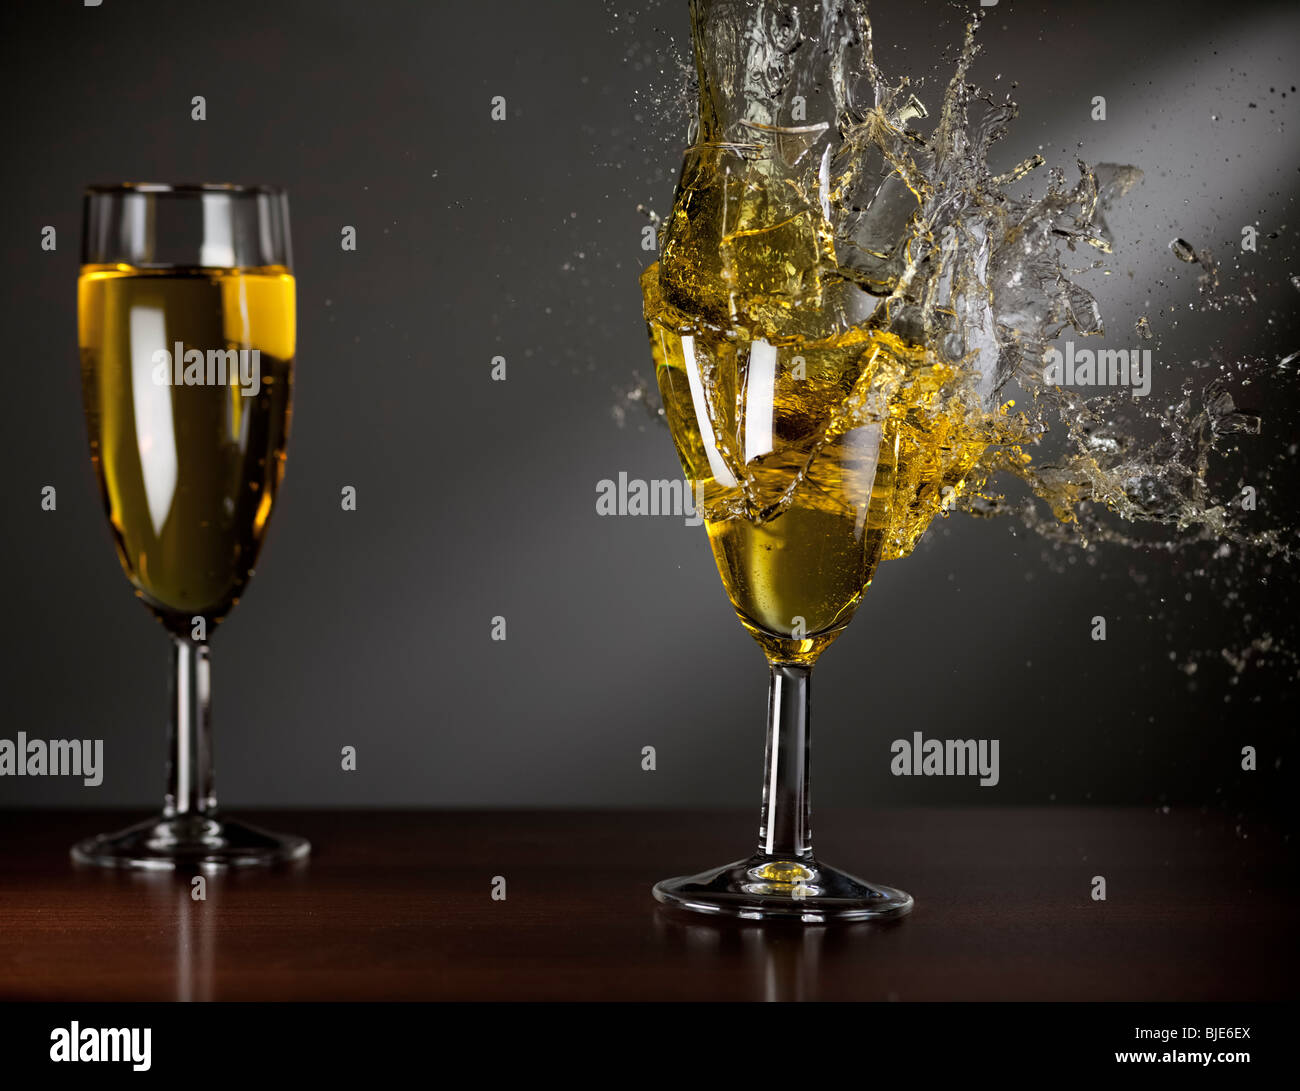 Shattering glass of champagne Stock Photo